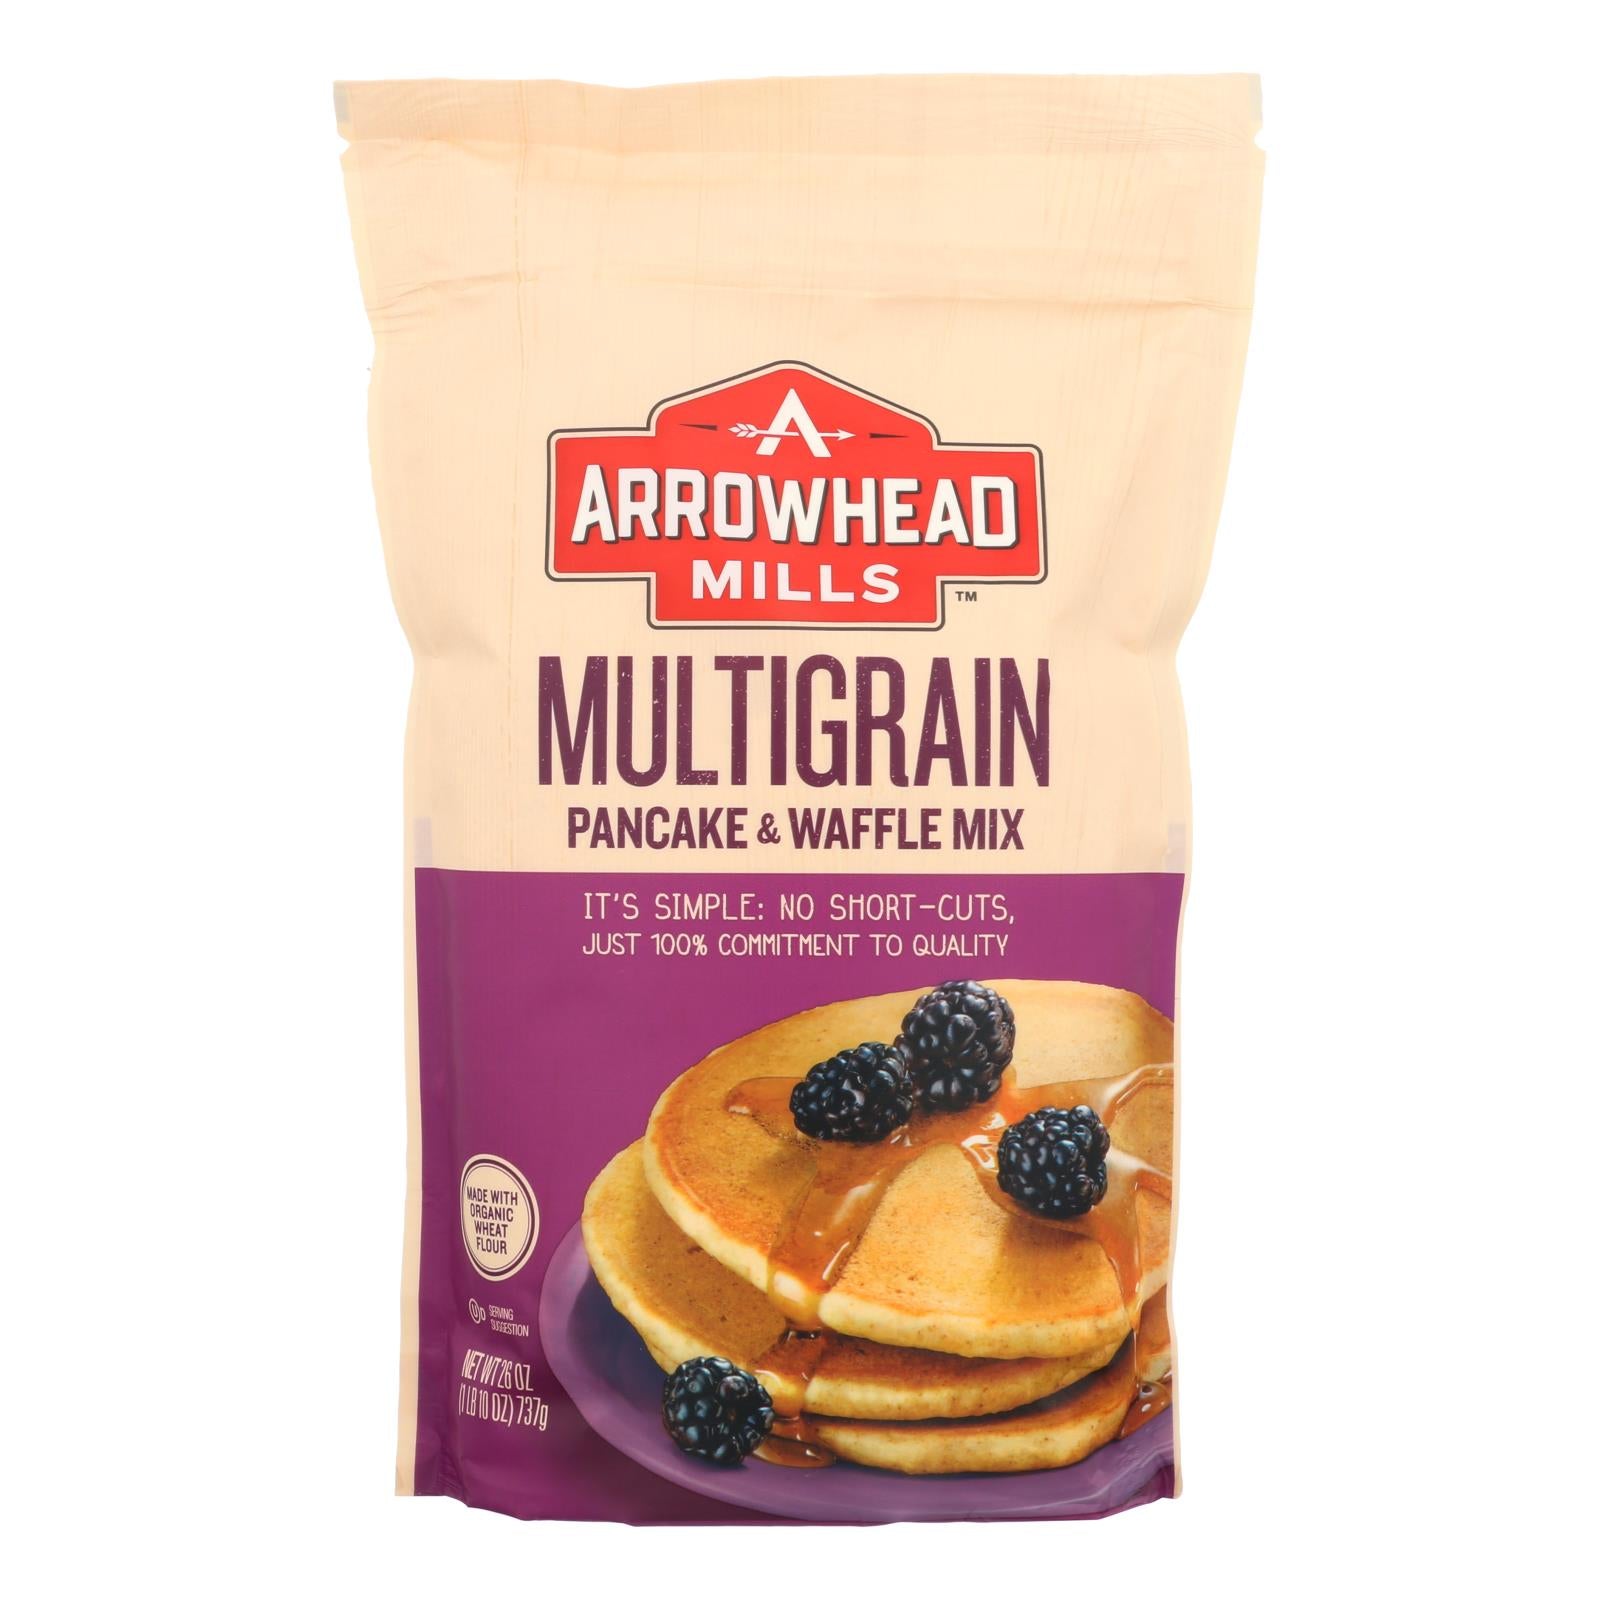 Arrowhead Mills, Arrowhead Mills - Pancake and Waffle Mix - Natural Multigrain - Case of 6 - 26 oz. (Pack of 6)